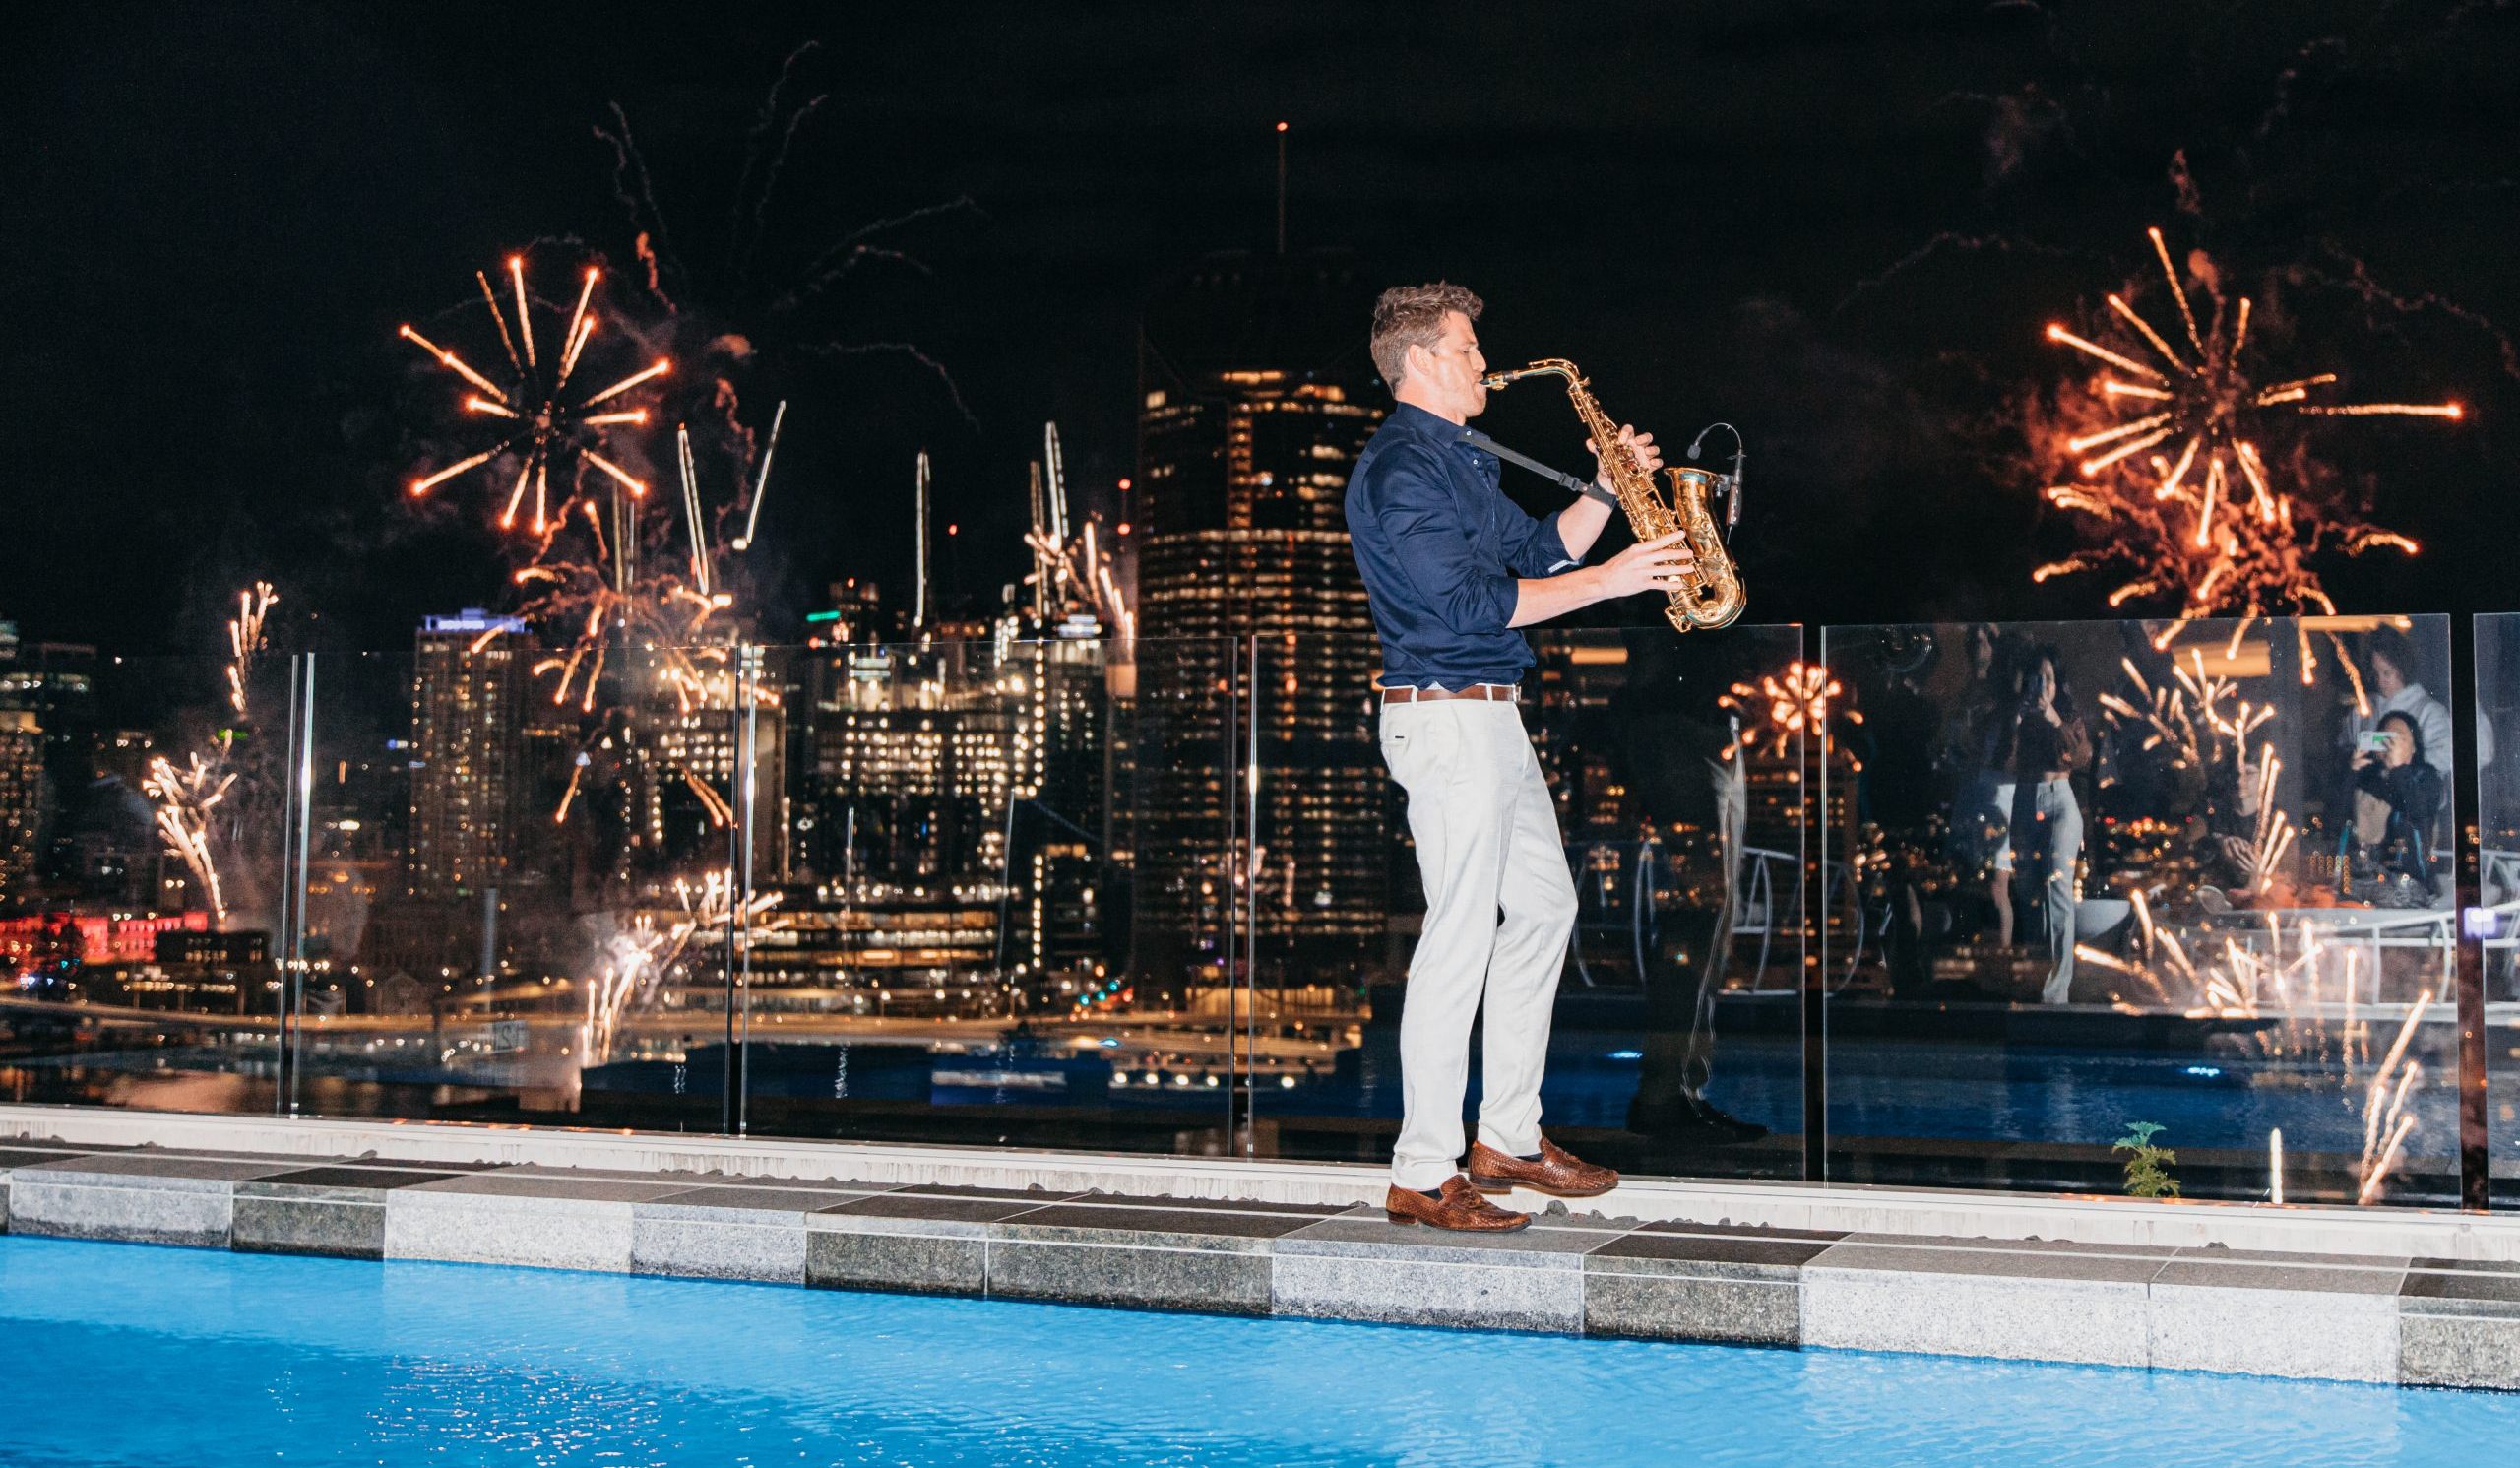 Celebrate Under the Stars: Unforgettable Rooftop Function at LINA Rooftop, Where River Fire Lights Up the Sky!, South Brisbane, Queensland, Australia